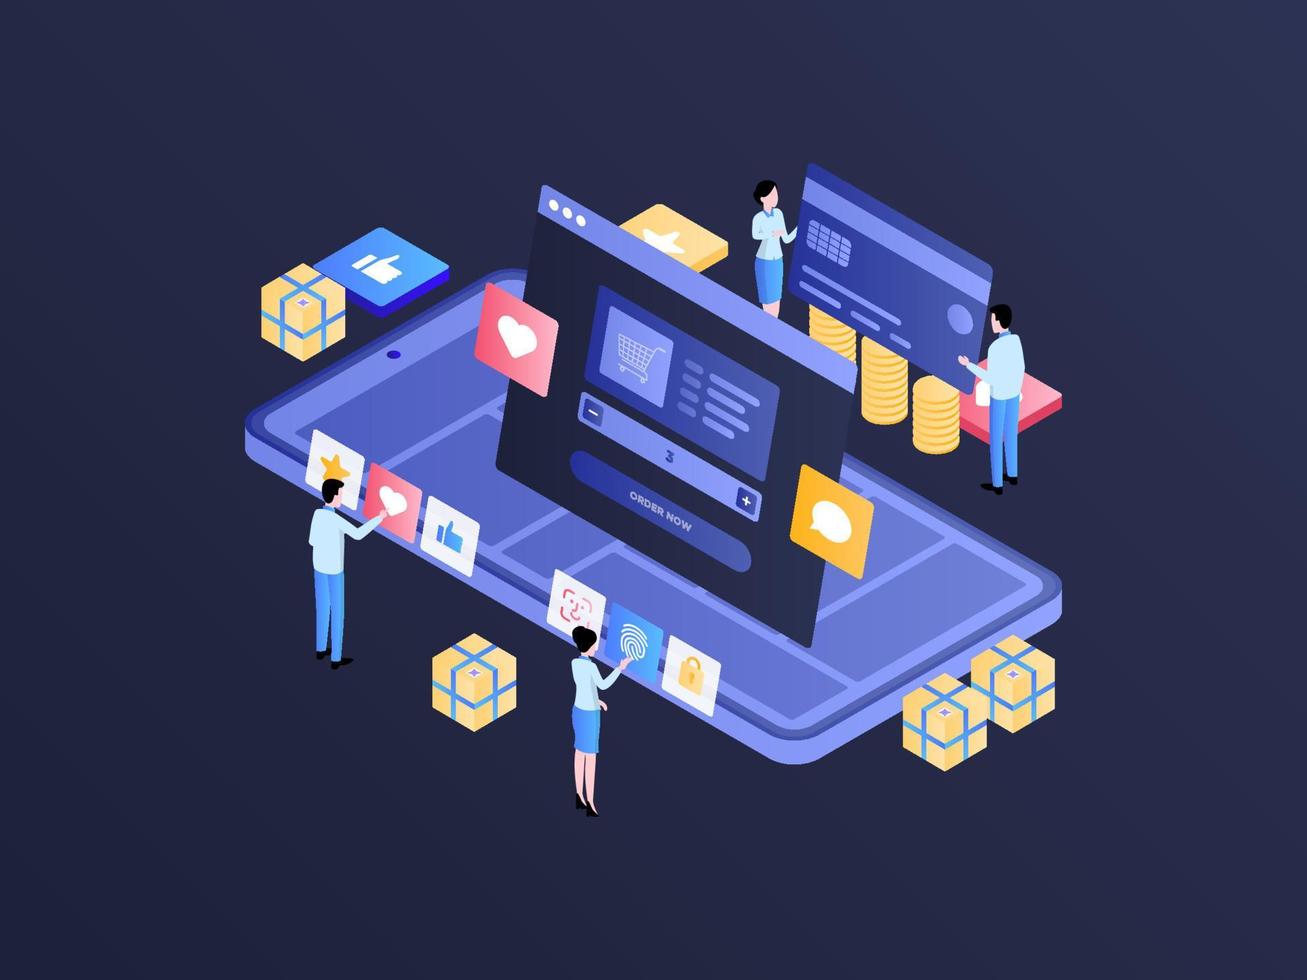 E-Commerce Order on Mobile Isometric Illustration Dark Gradient. Suitable for Mobile App, Website, Banner, Diagrams, Infographics, and Other Graphic Assets. vector